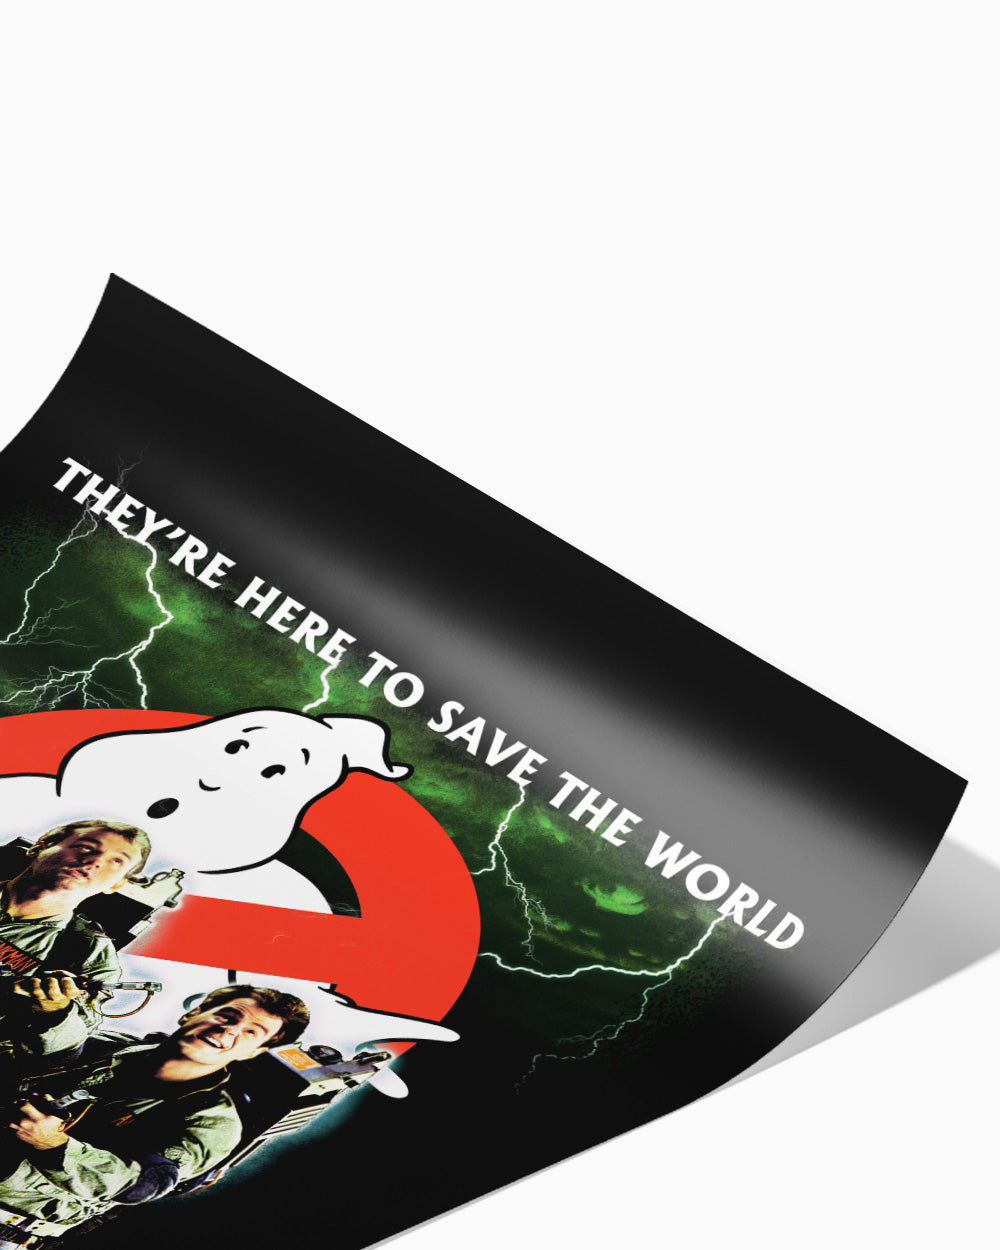 Ghostbusters Here To Save The World Art Print | Wall Art